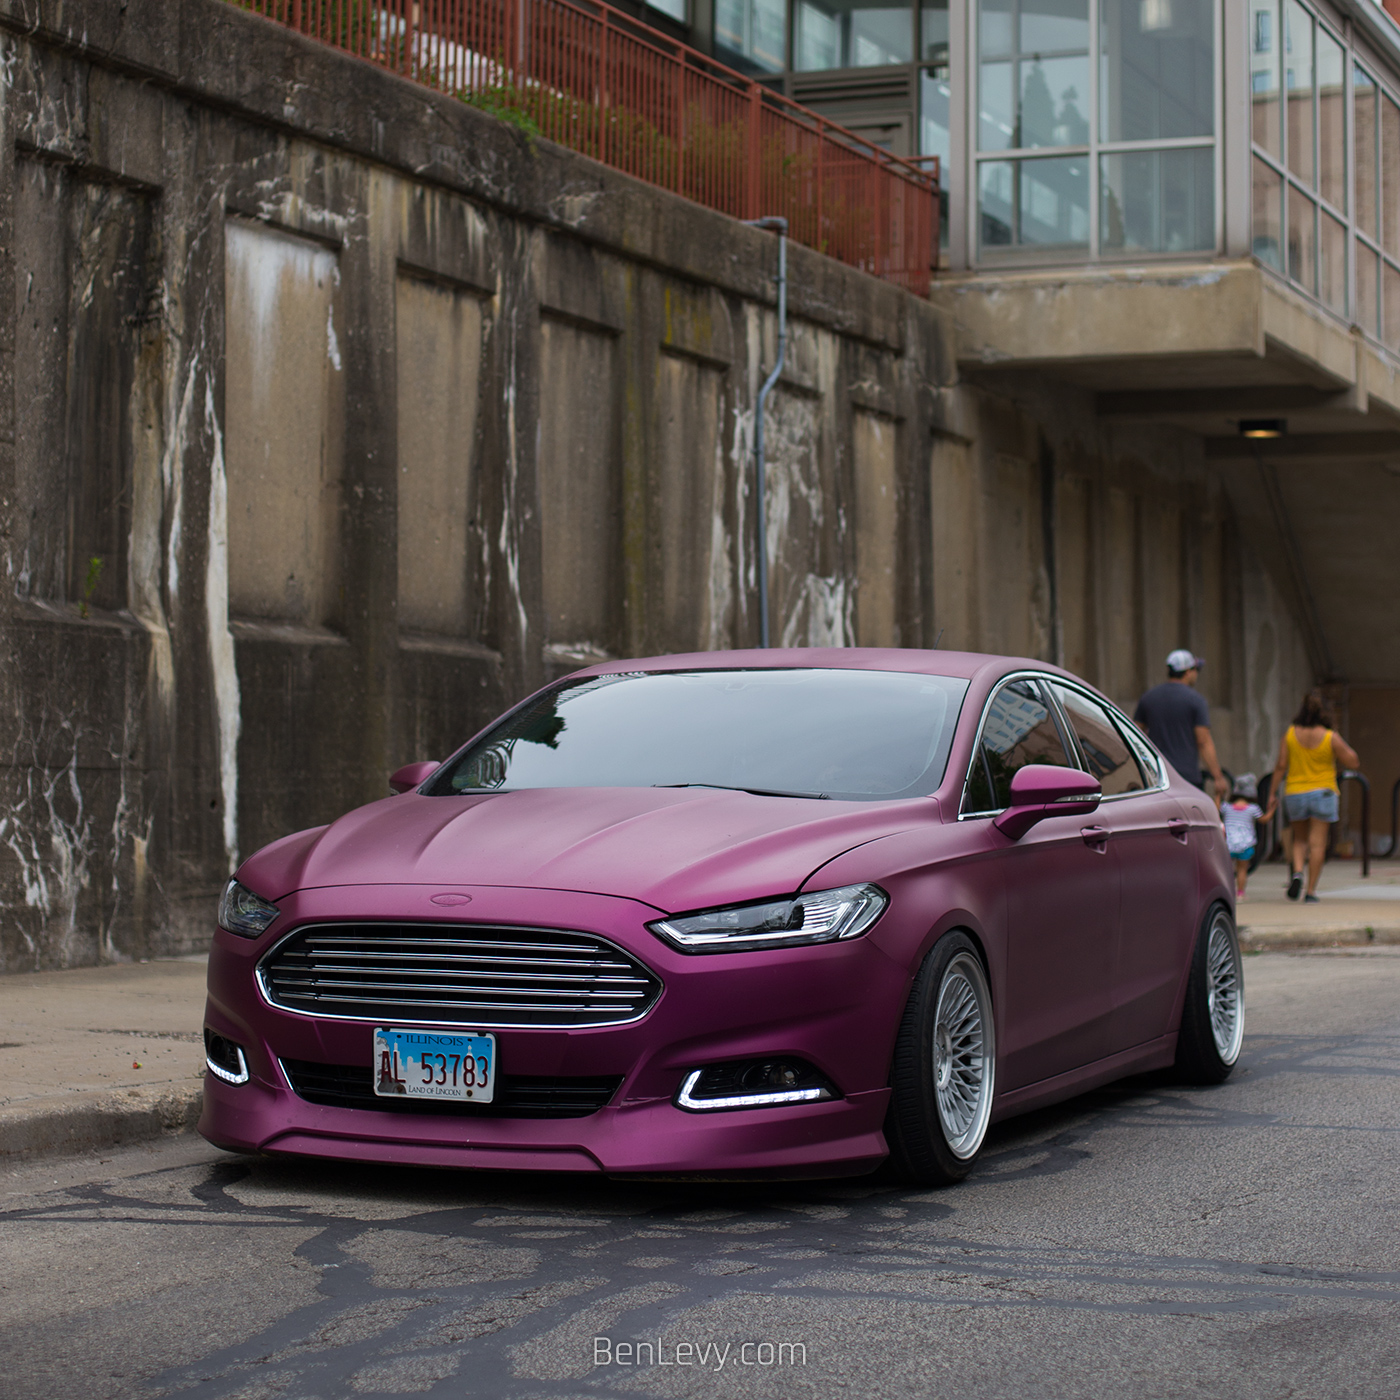 Ford Fusion wrapped in purple